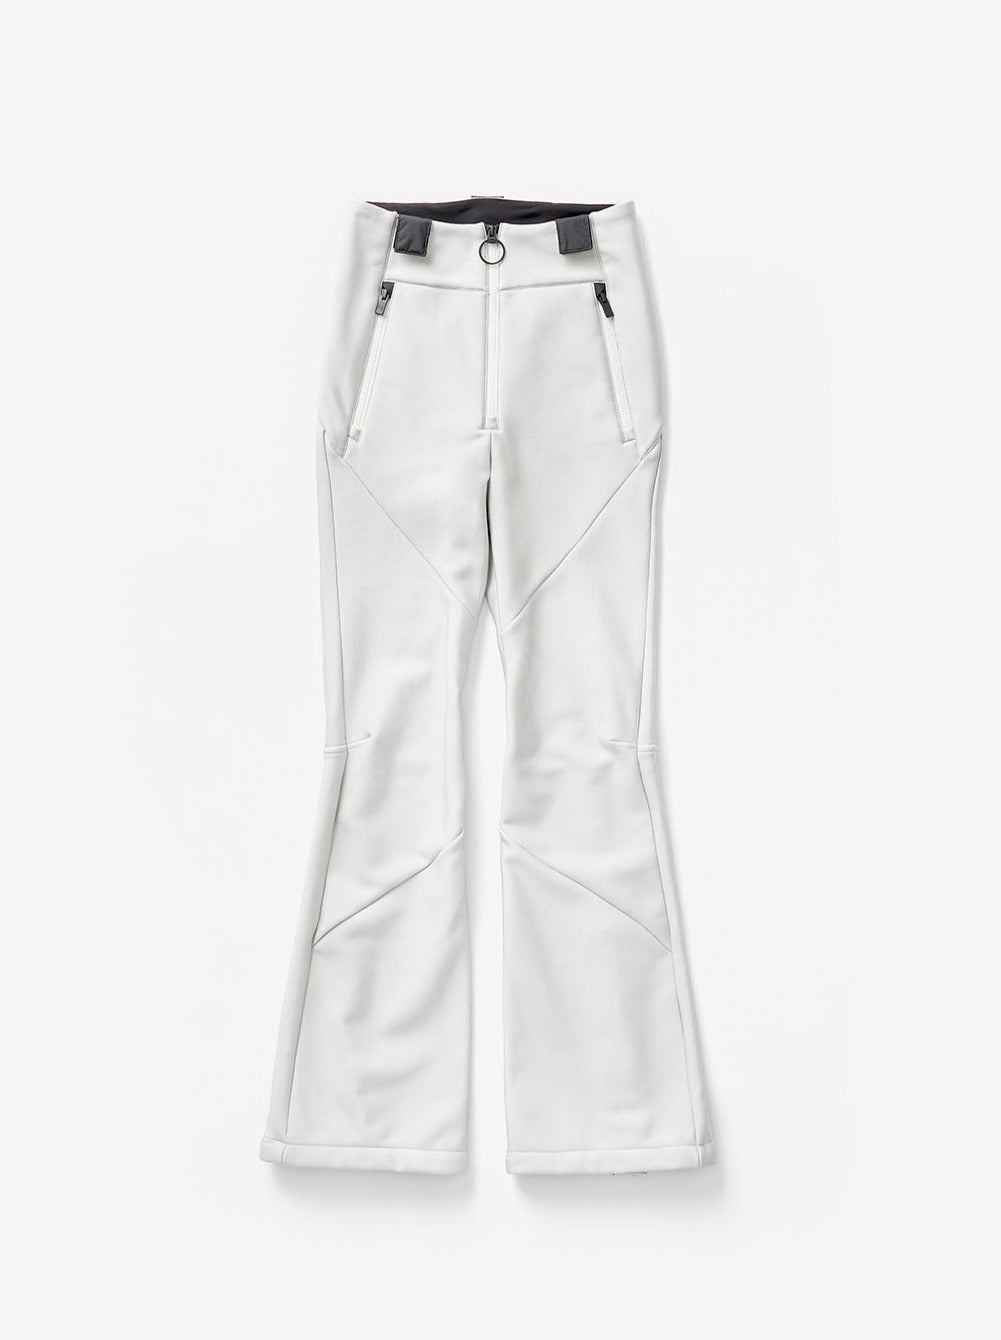 Women's Highwaisted Stretch Ski Pants - Pearl - flat lay - front